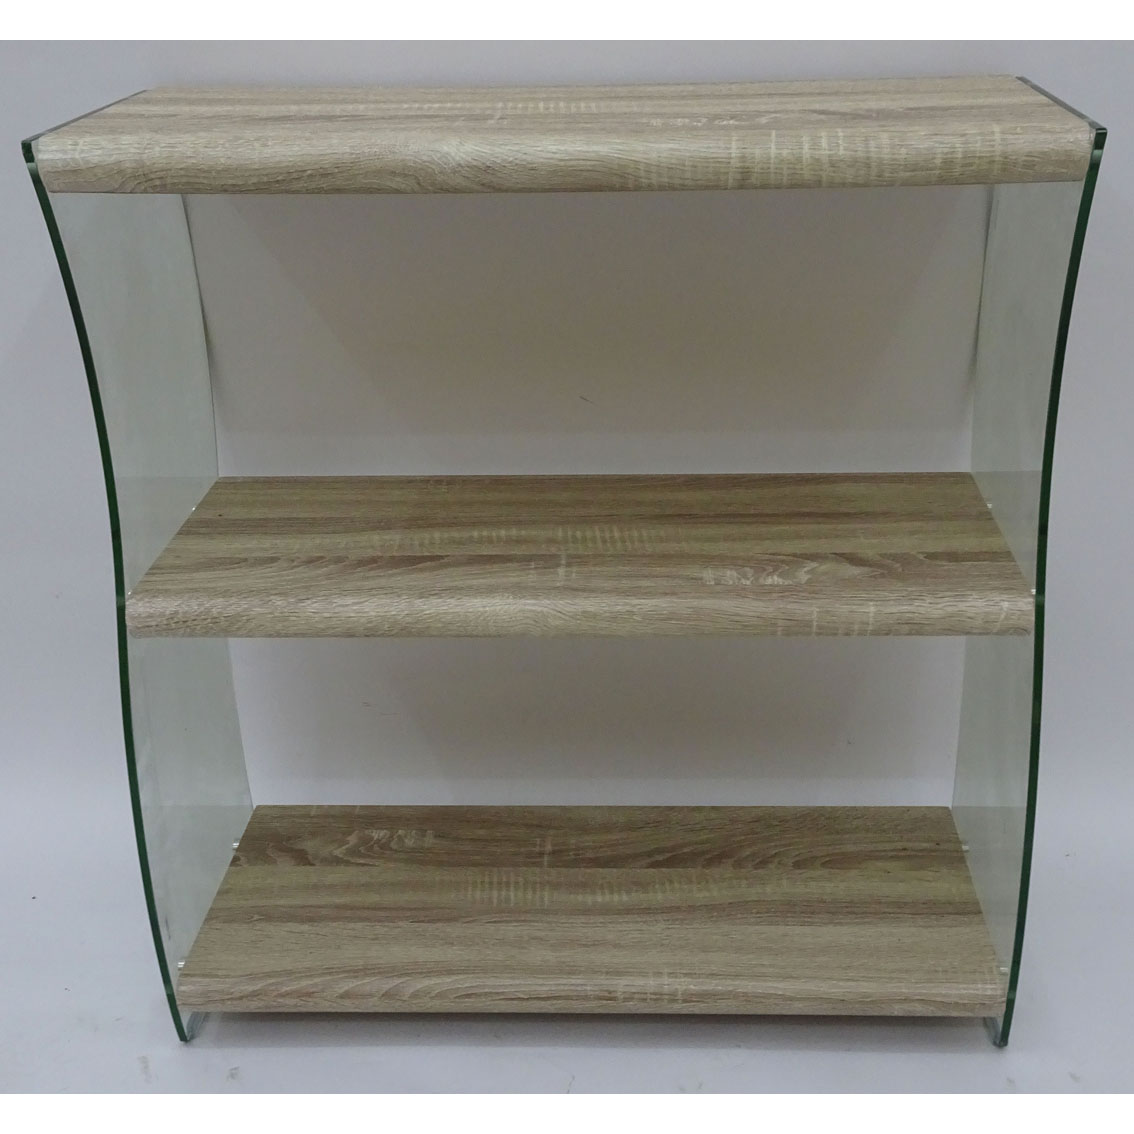 Contemporary curved glass book shelf with wood veneer tiers 